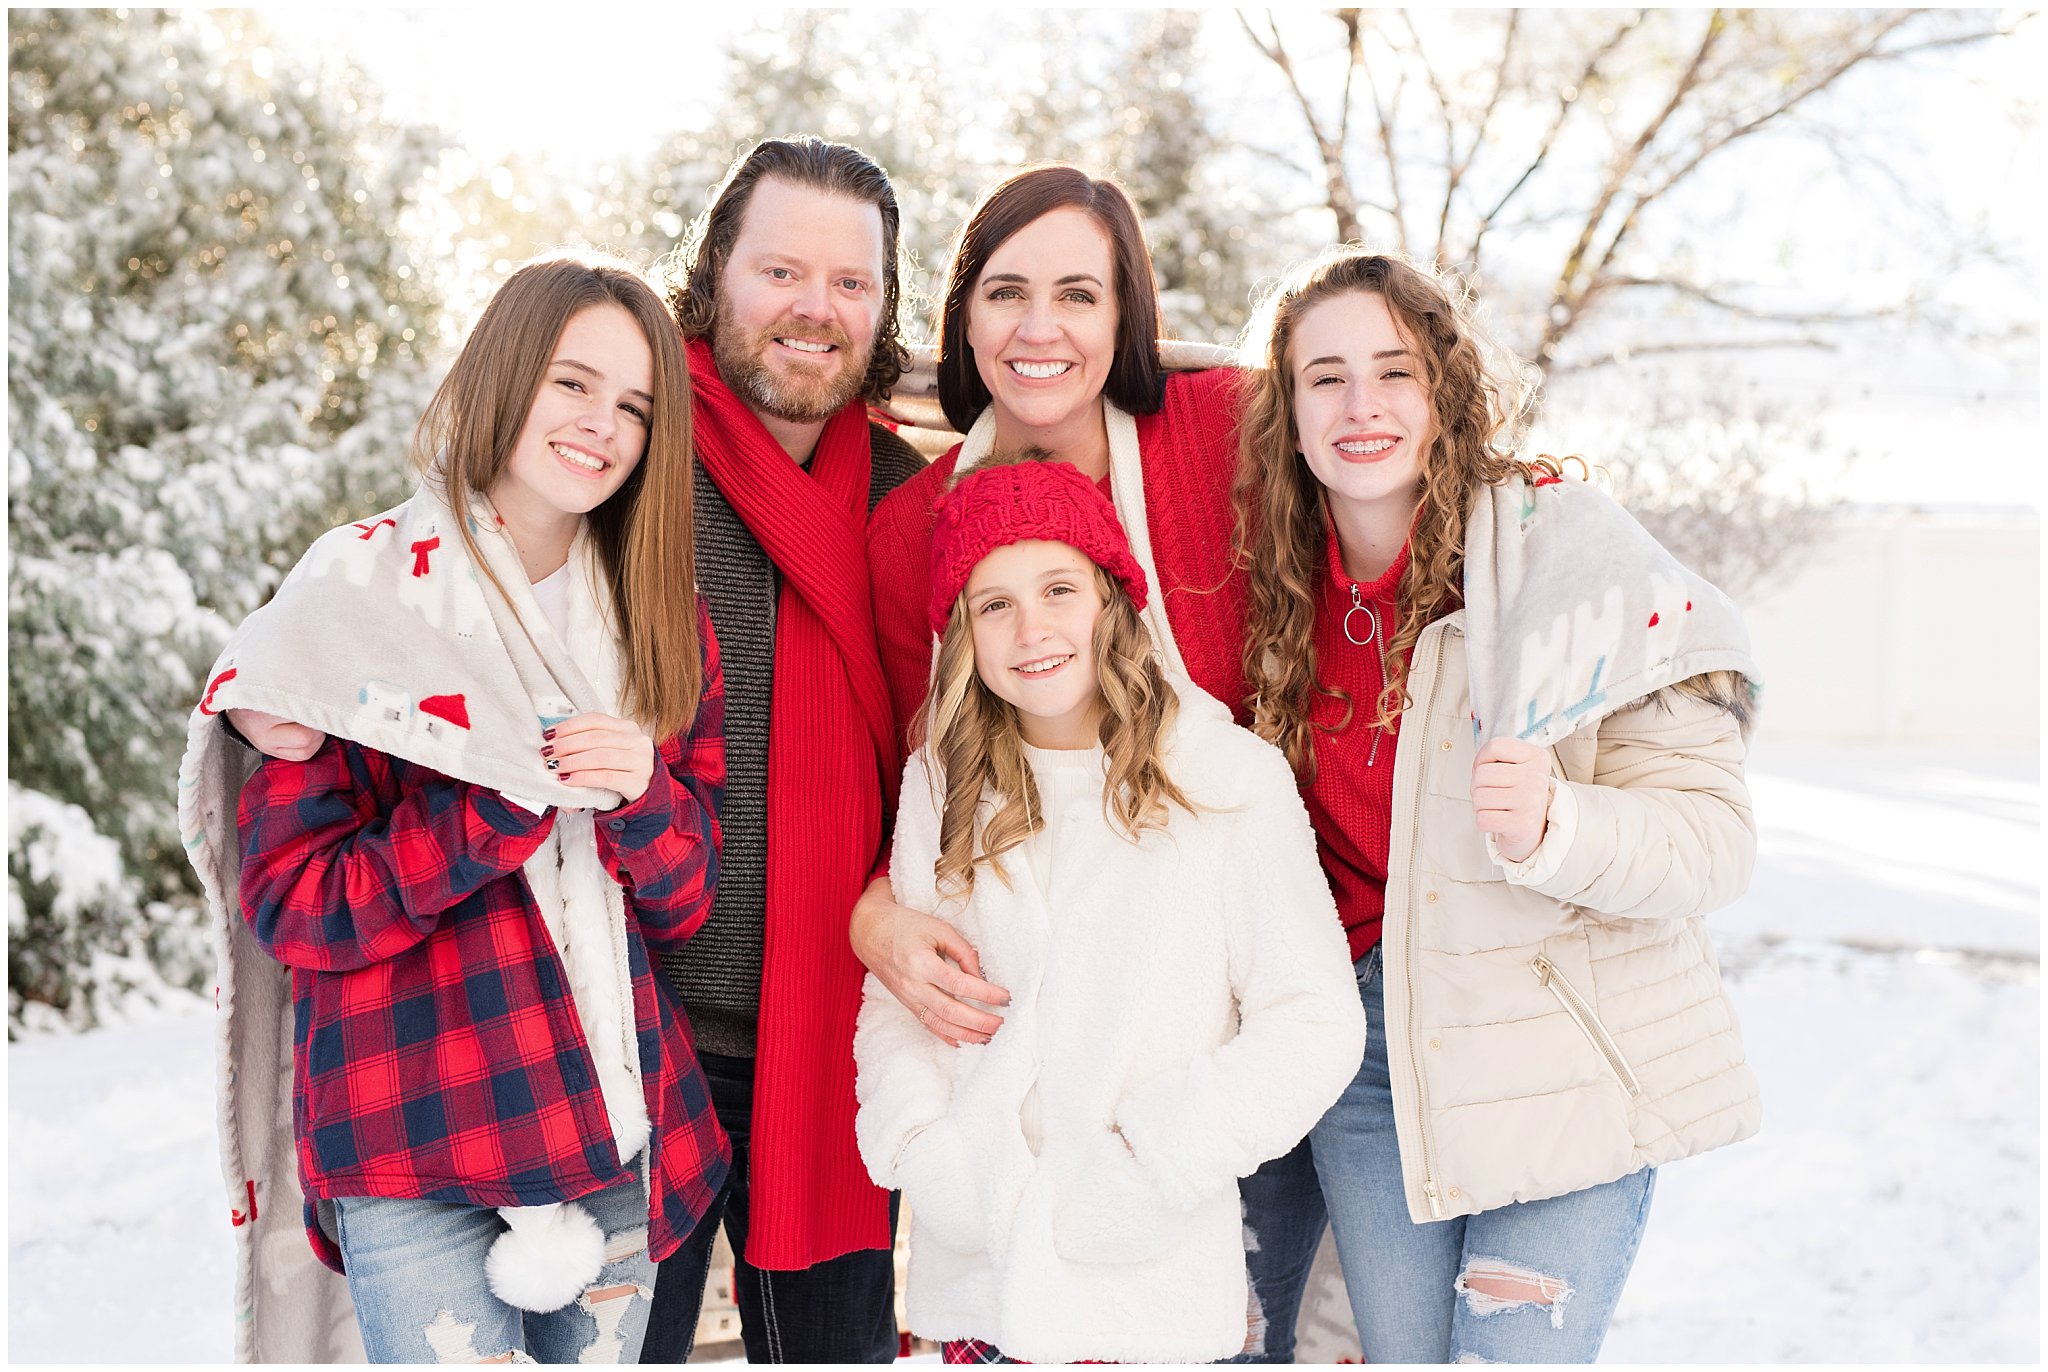 Family wrapped in blanket in the snow standing in front of Christmas trees | Utah Family Christmas Photoshoot | Oak Hills Reception and Event | Jessie and Dallin Photography